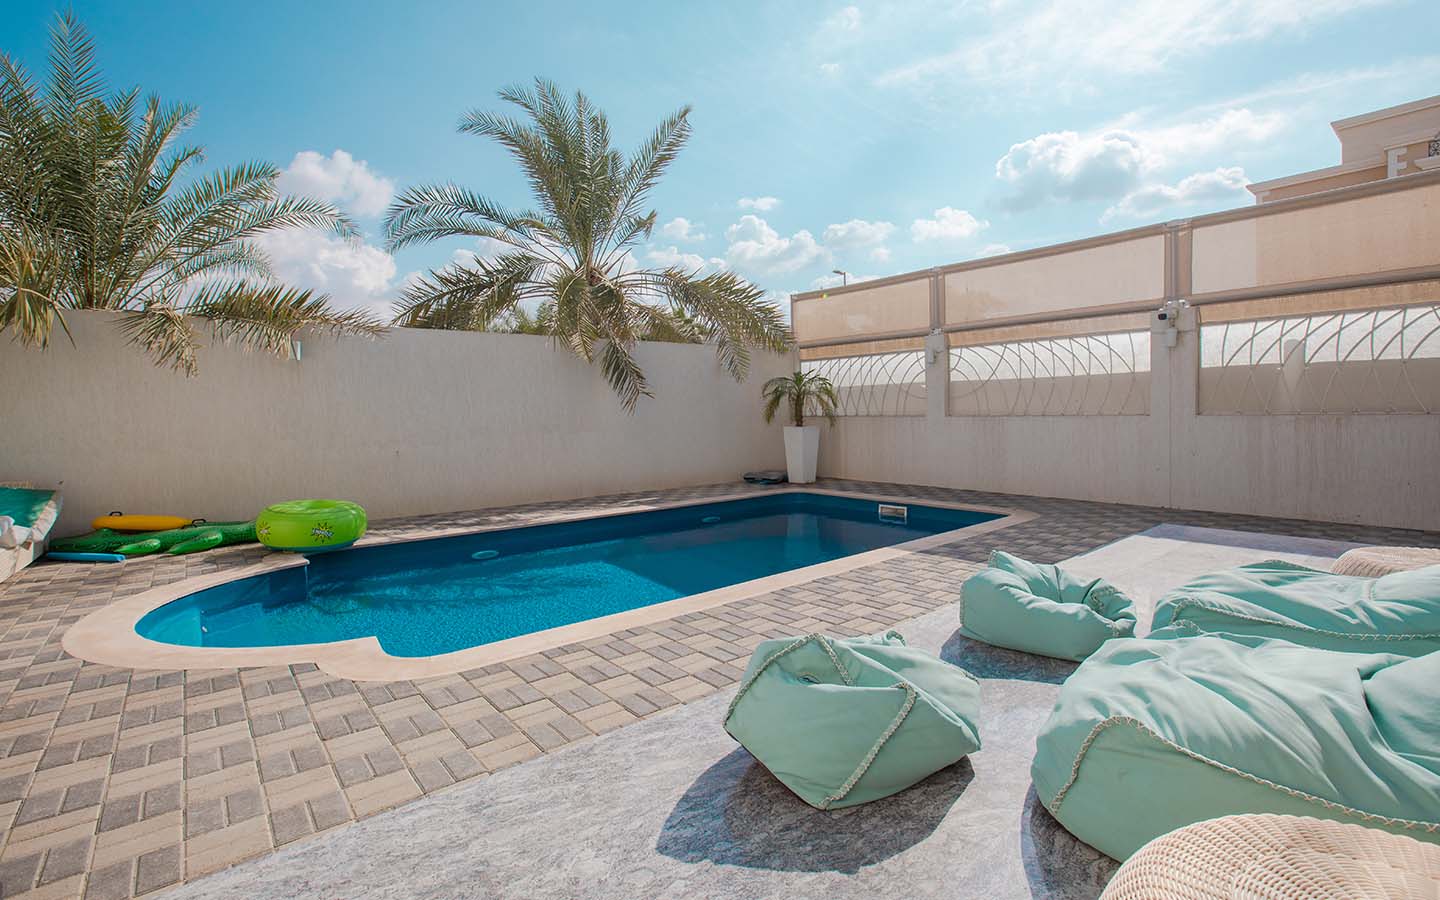 villas with swimming pools are available in mirdif hills